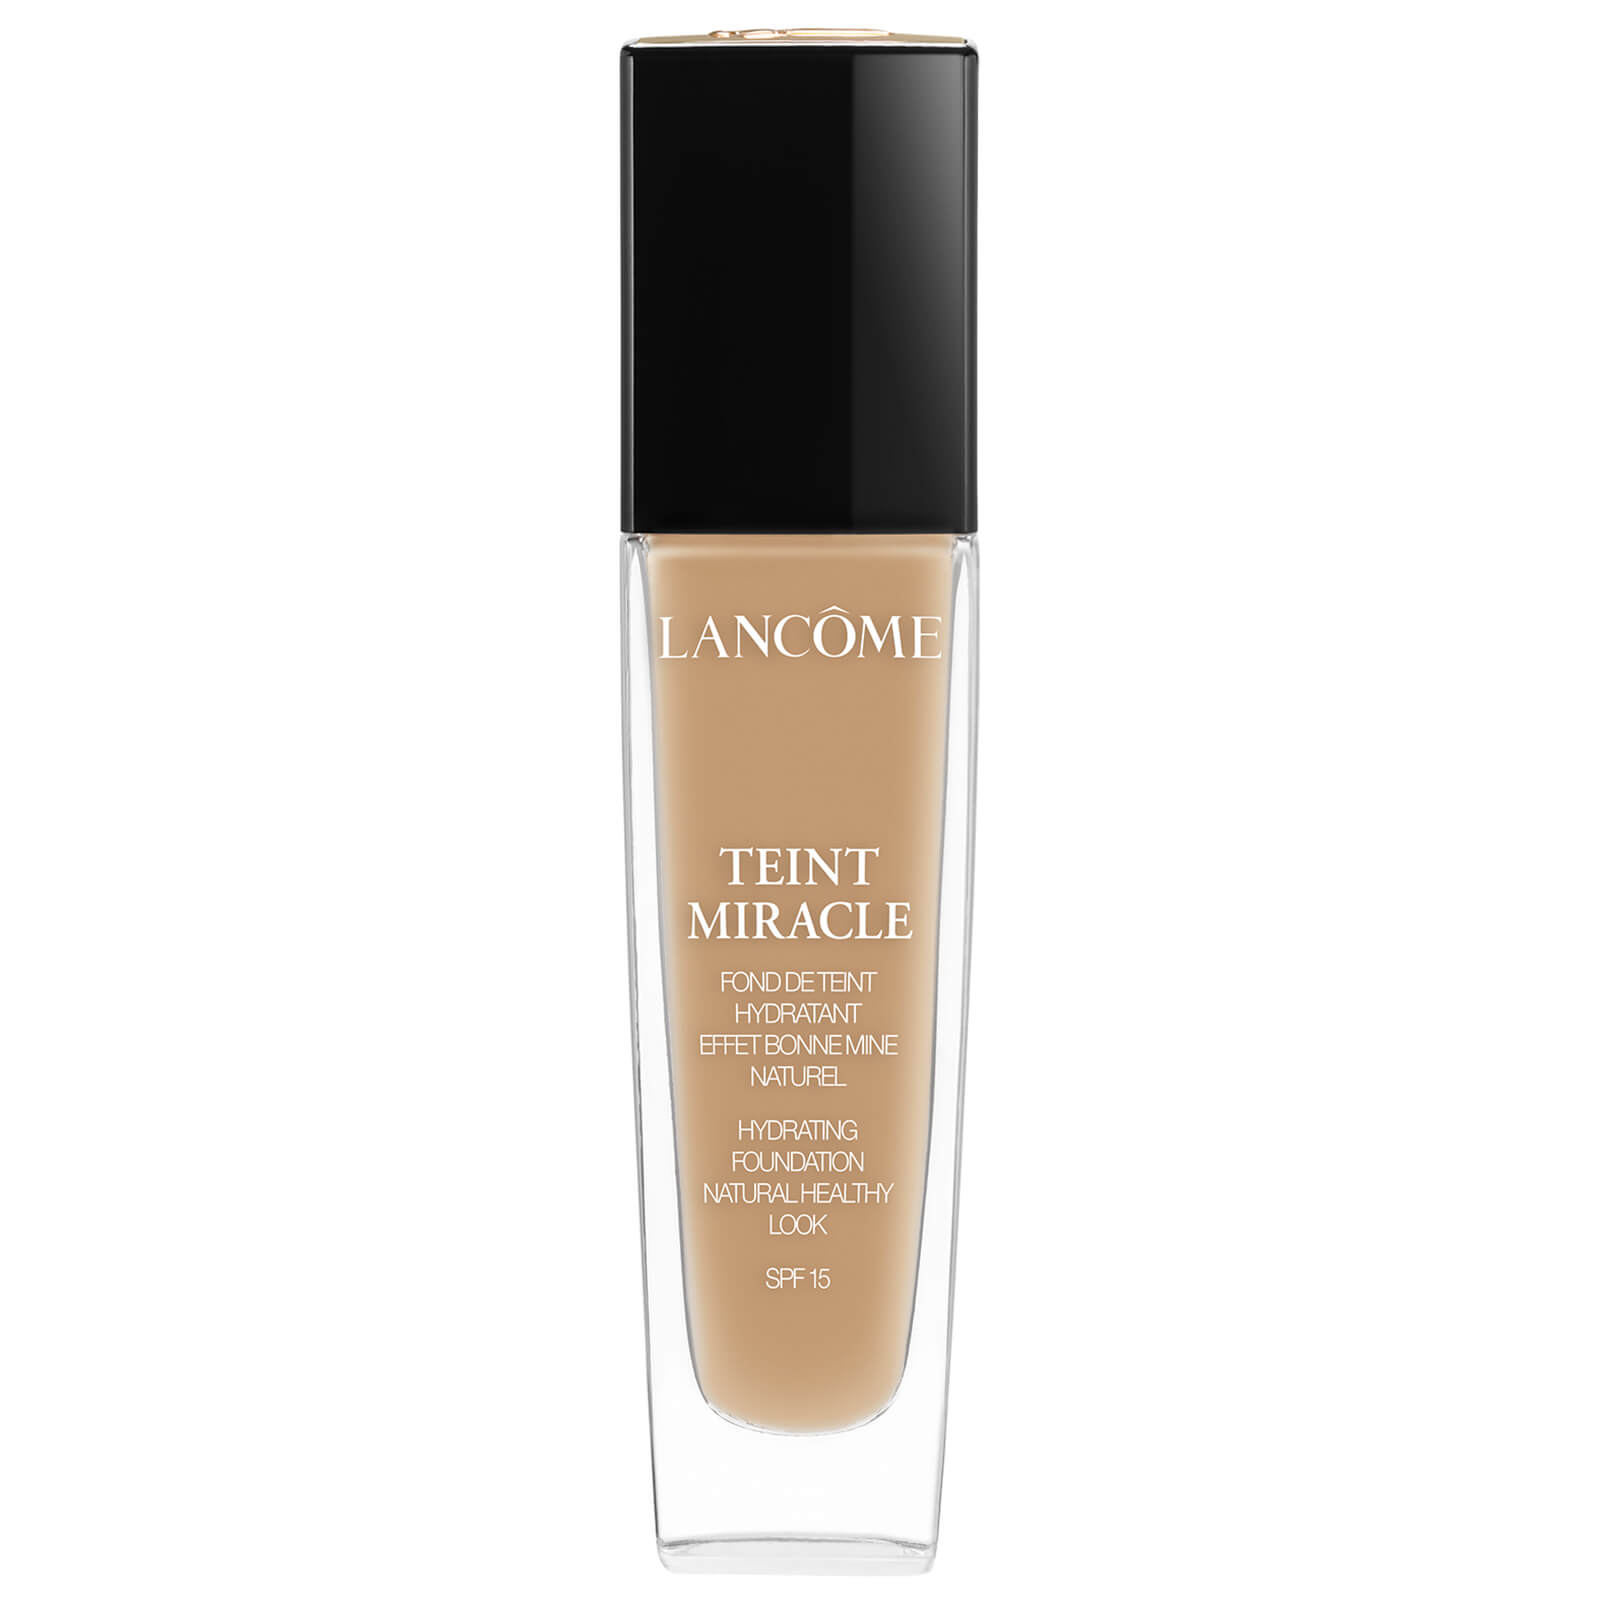 Lancome Teint Miracle Foundation SPF15 30ml - 06 Beige Cannelle